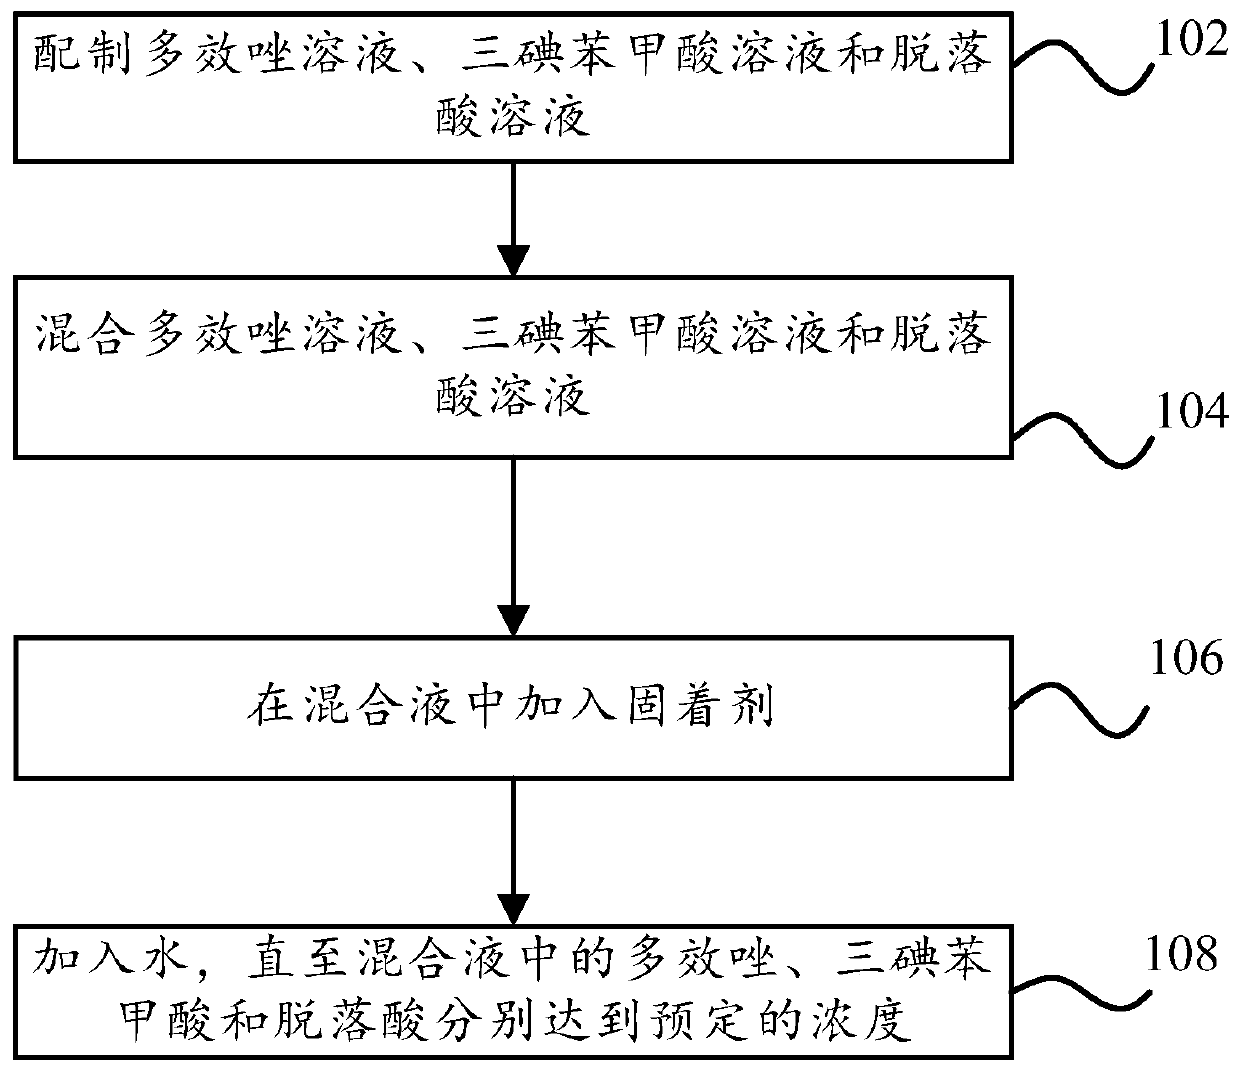 A plant growth retarder, its preparation method and application